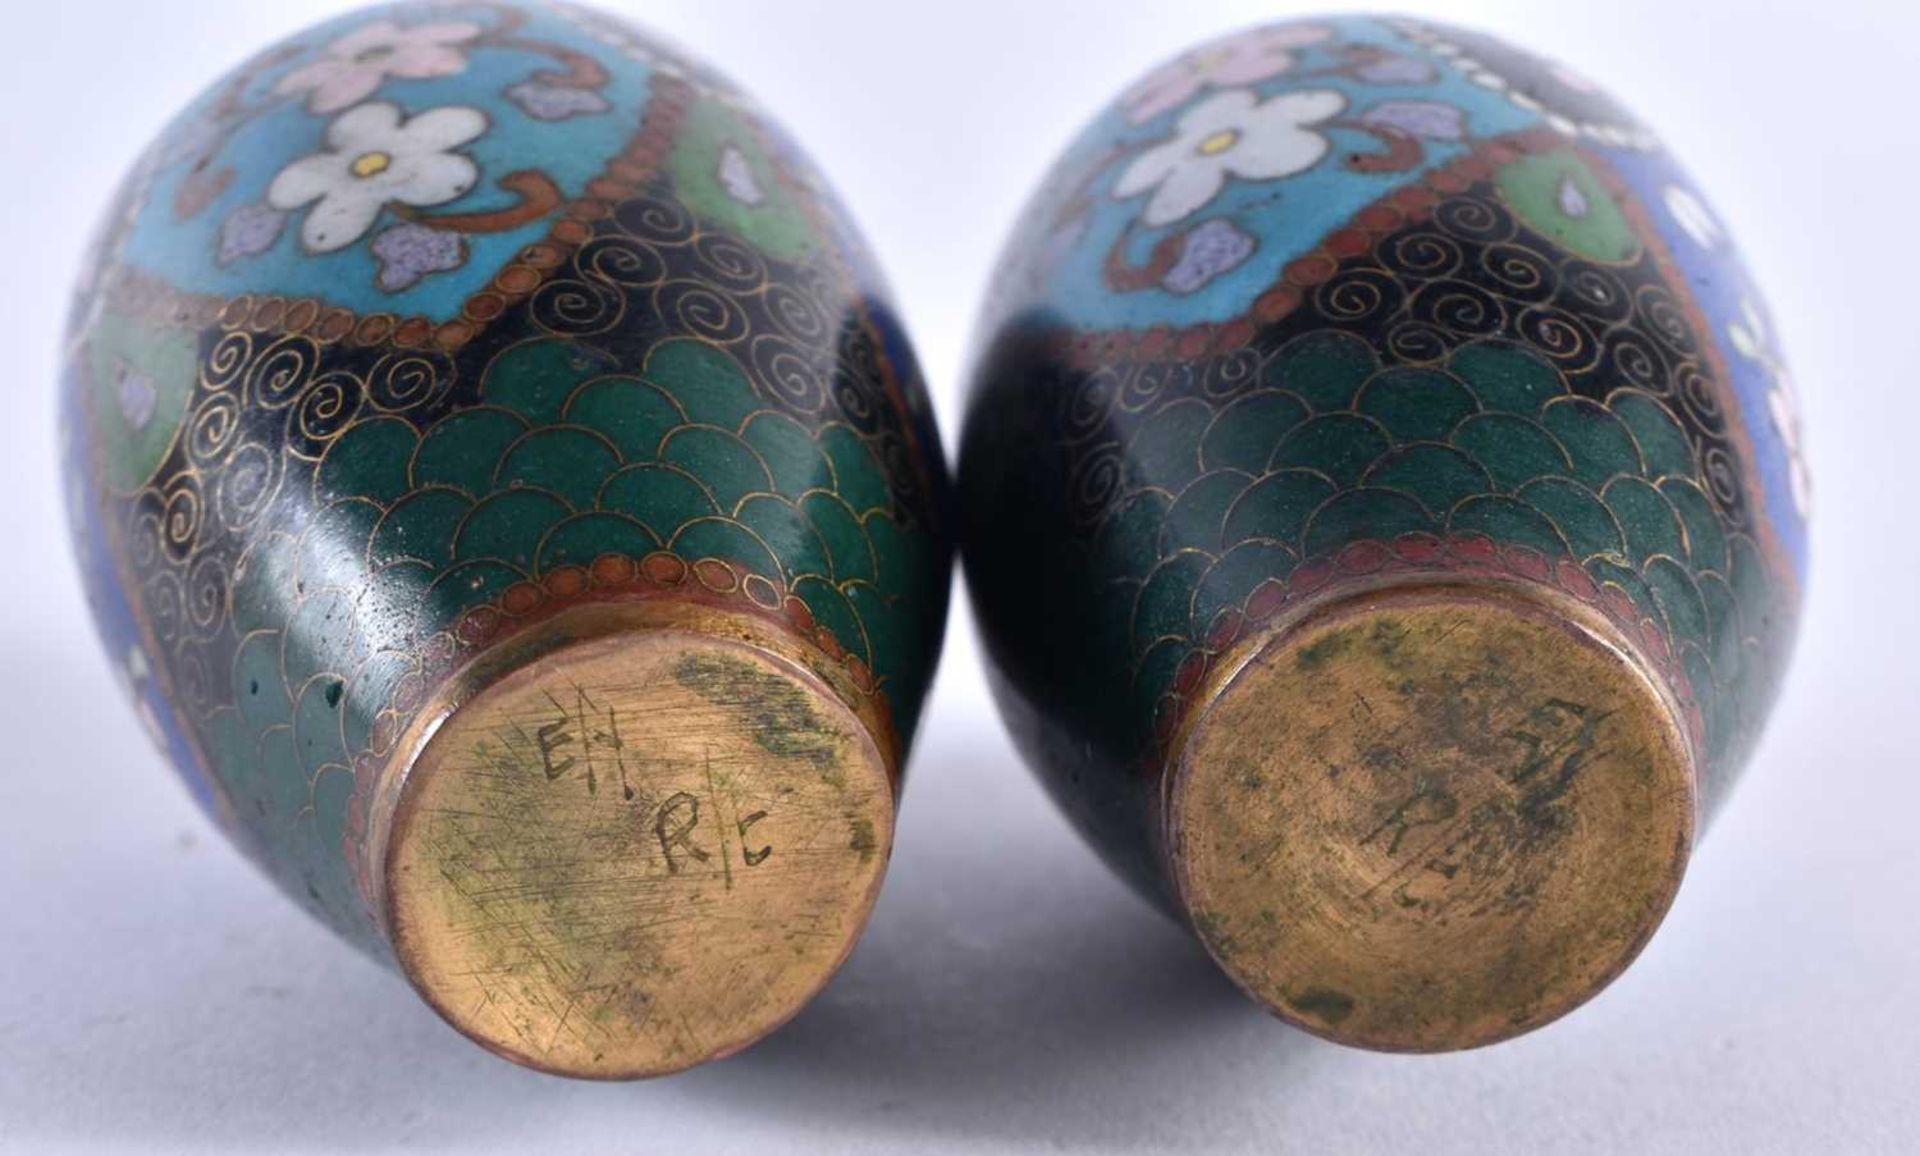 A MINIATURE PAIR OF LATE 19TH CENTURY JAPANESE MEIJI PERIOD CLOISONNE ENAMEL VASES decorated with - Image 5 of 5